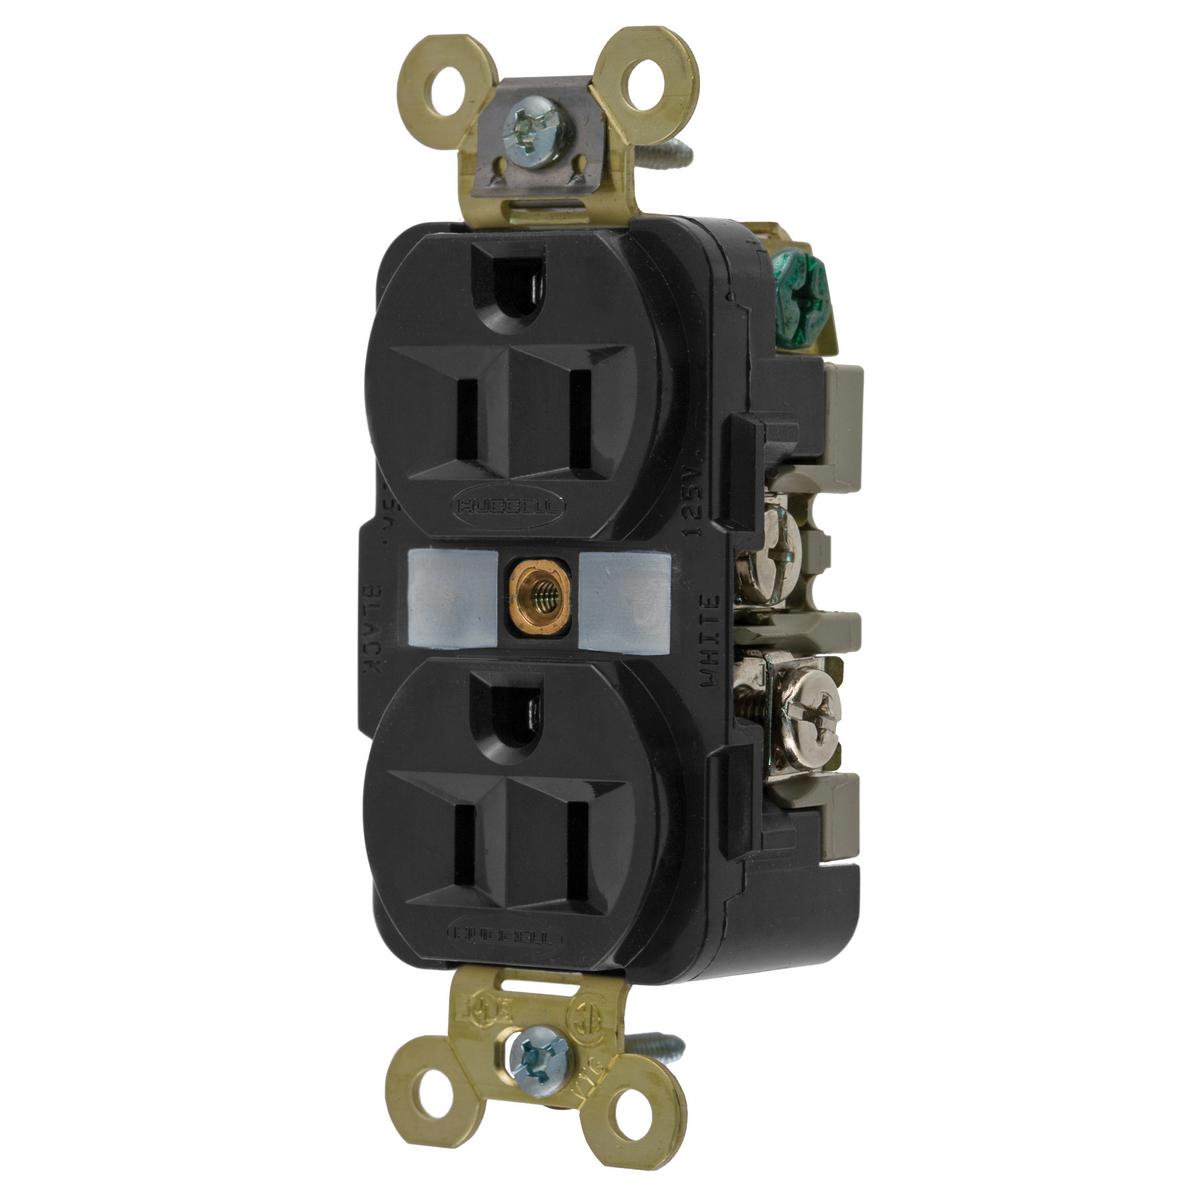 Hubbell HBL5262BK Straight Blade Devices, Receptacles, Duplex, Industrial Grade, 2-Pole 3-Wire Grounding, 15A 125V, 5-15R, Black, Single Pack.  ; Back wired ground terminal allows faster, easier installation ; One-piece brass integral ground strap ; Finder Groove Face ; De